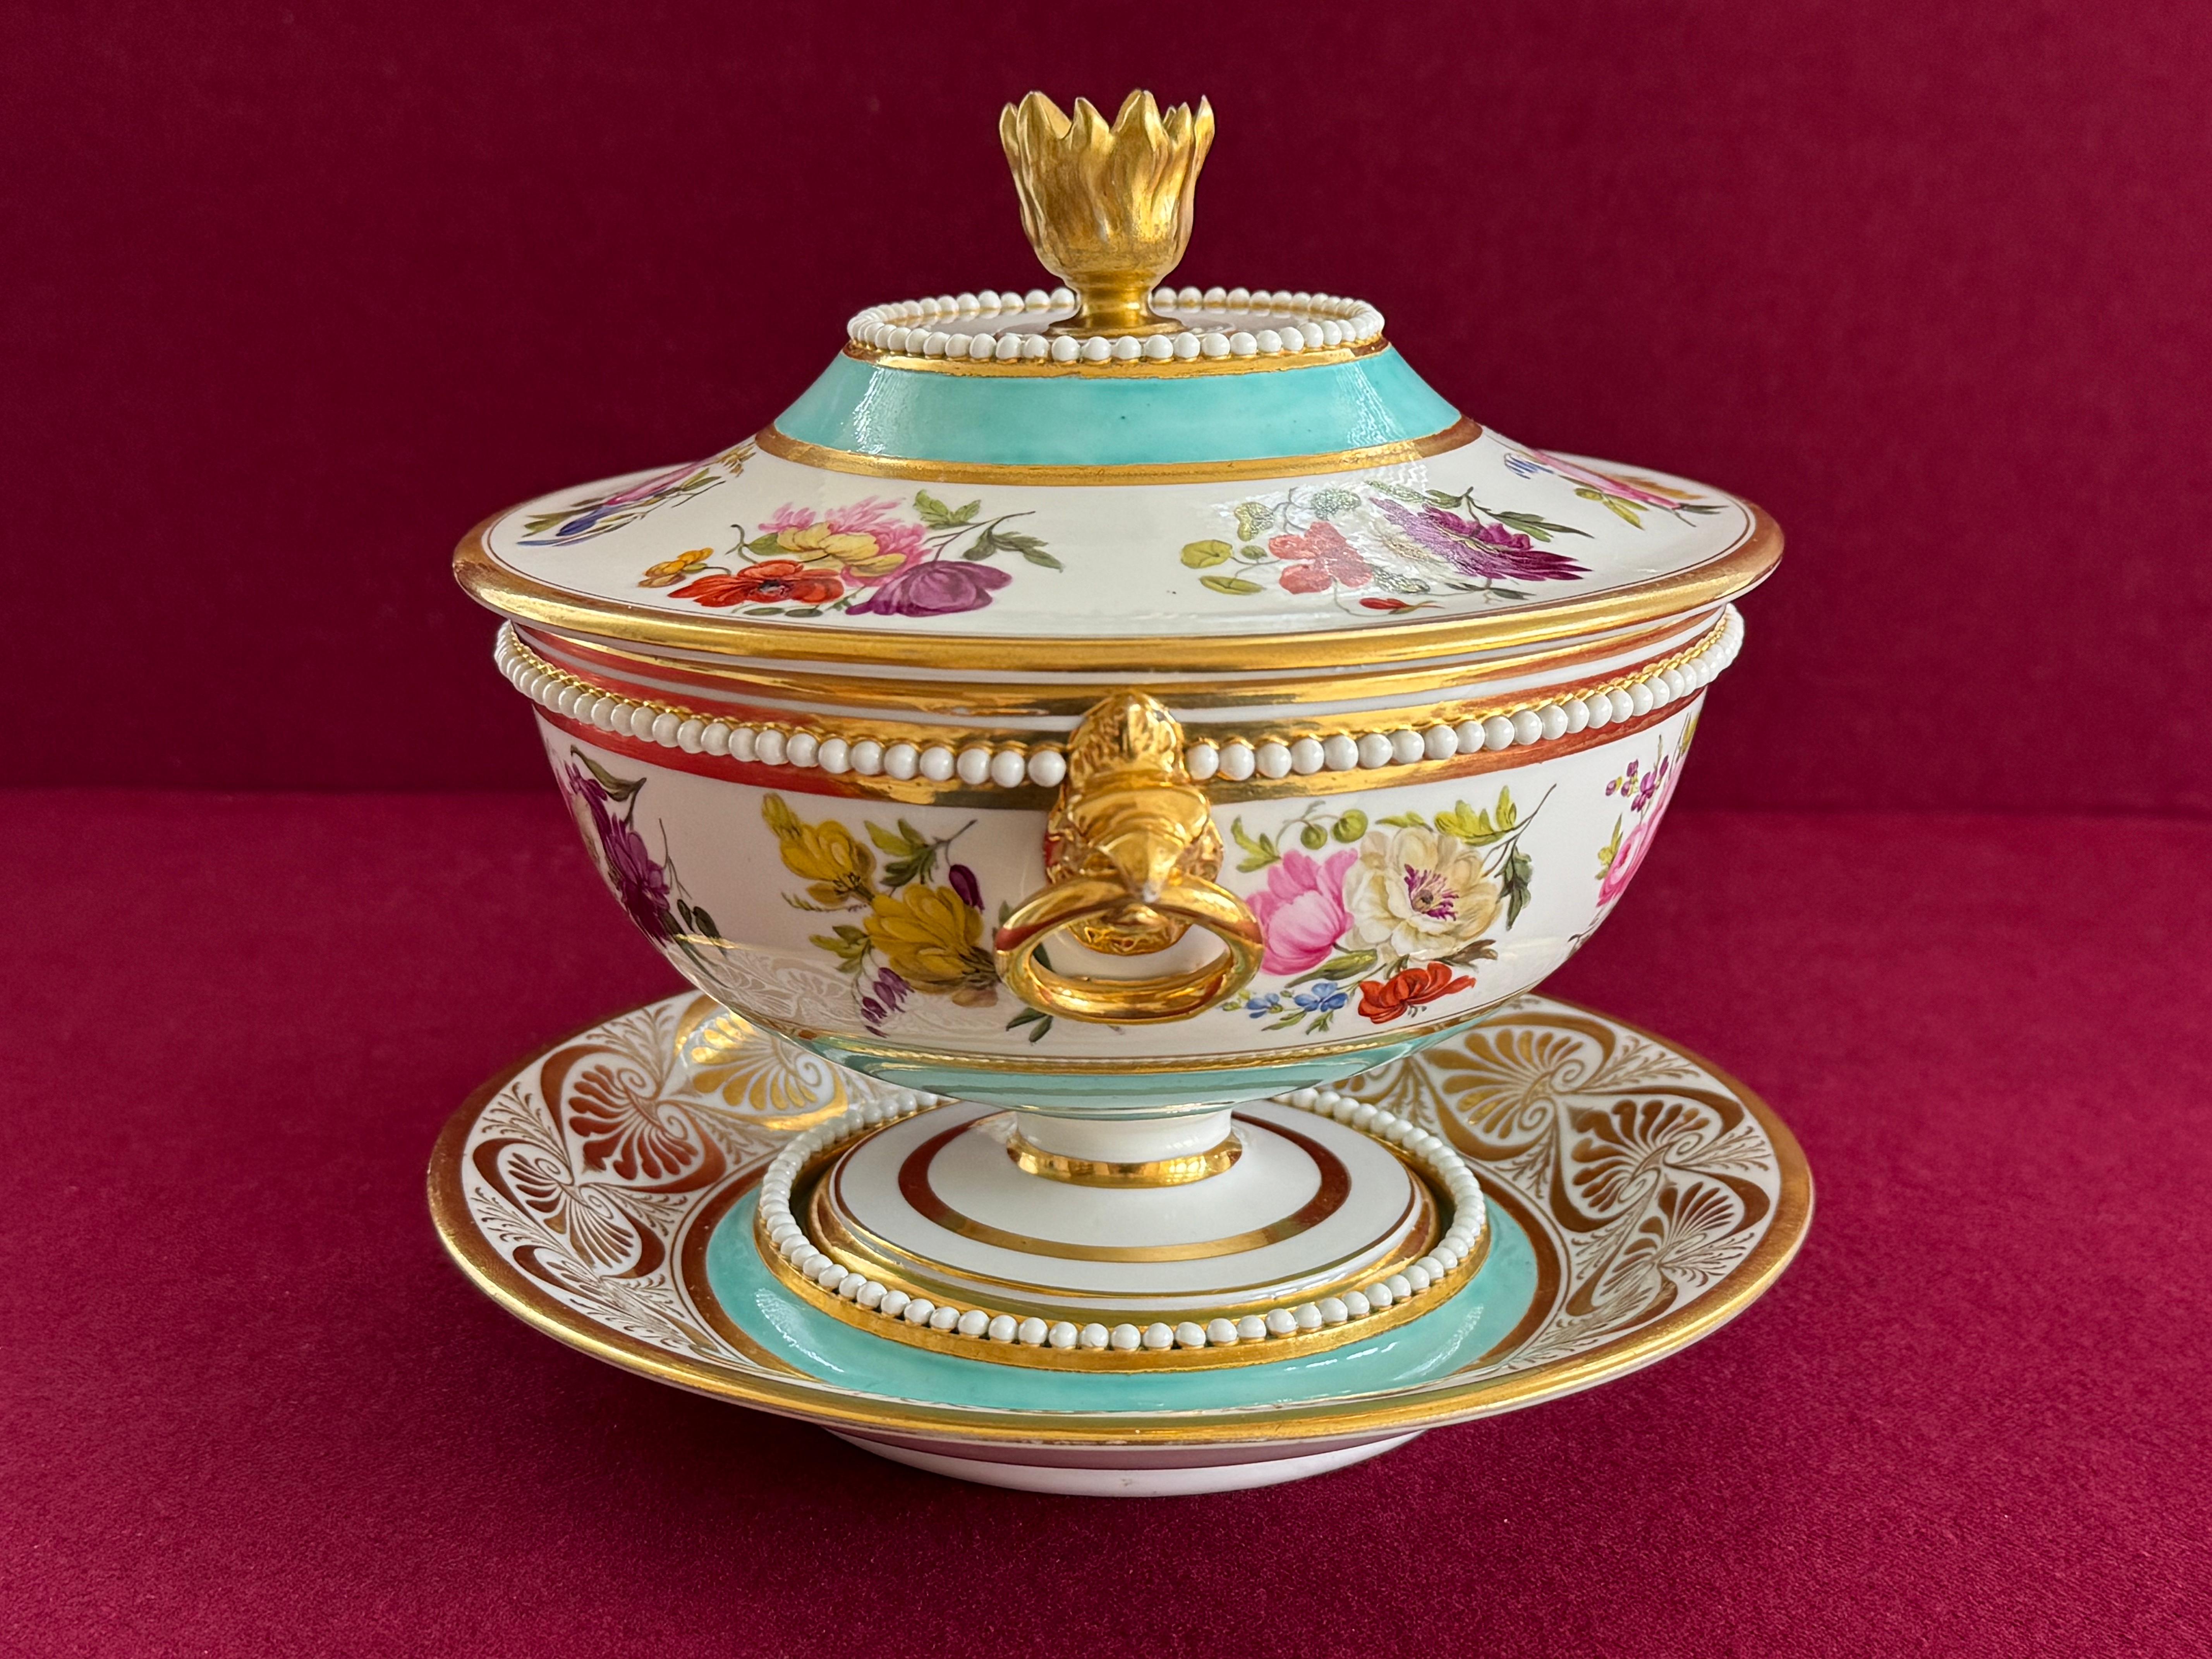 19th Century A Barr, Flight & Barr Worcester Porcelain Tureen and Stand c.1804-1807